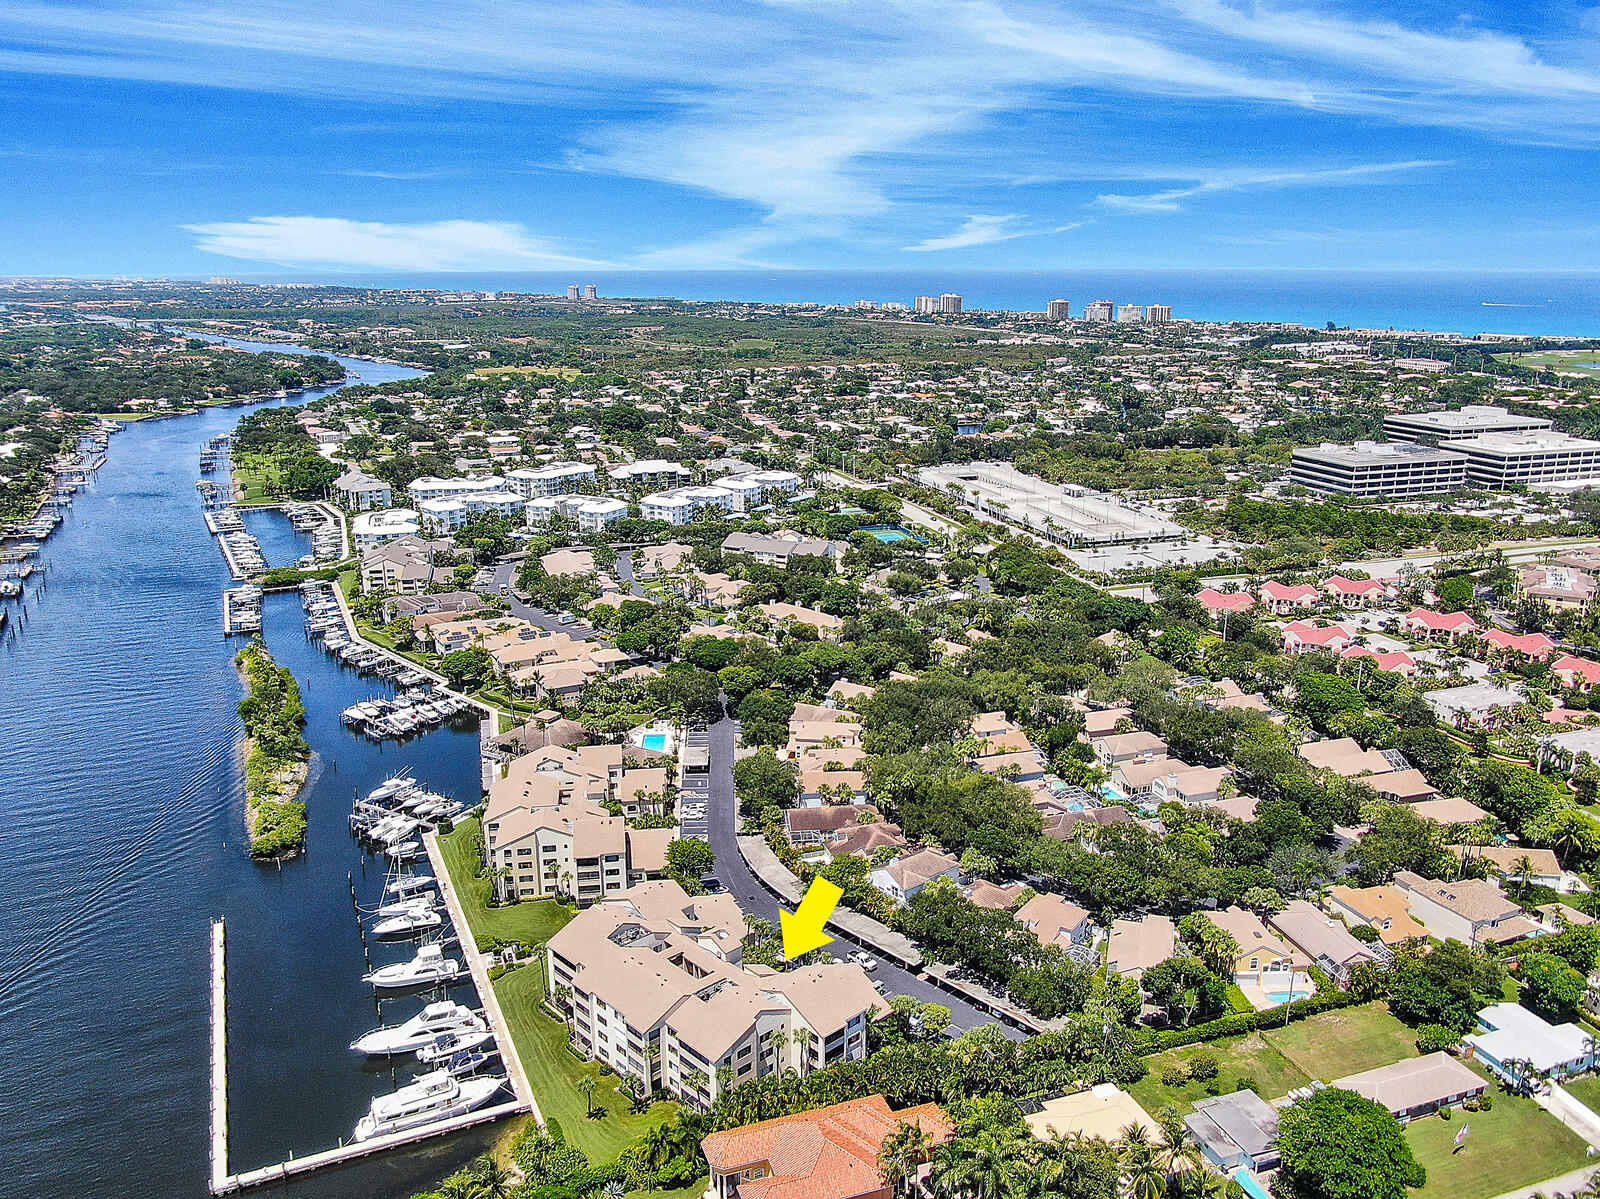 Arial of 900 building and Intracoastal